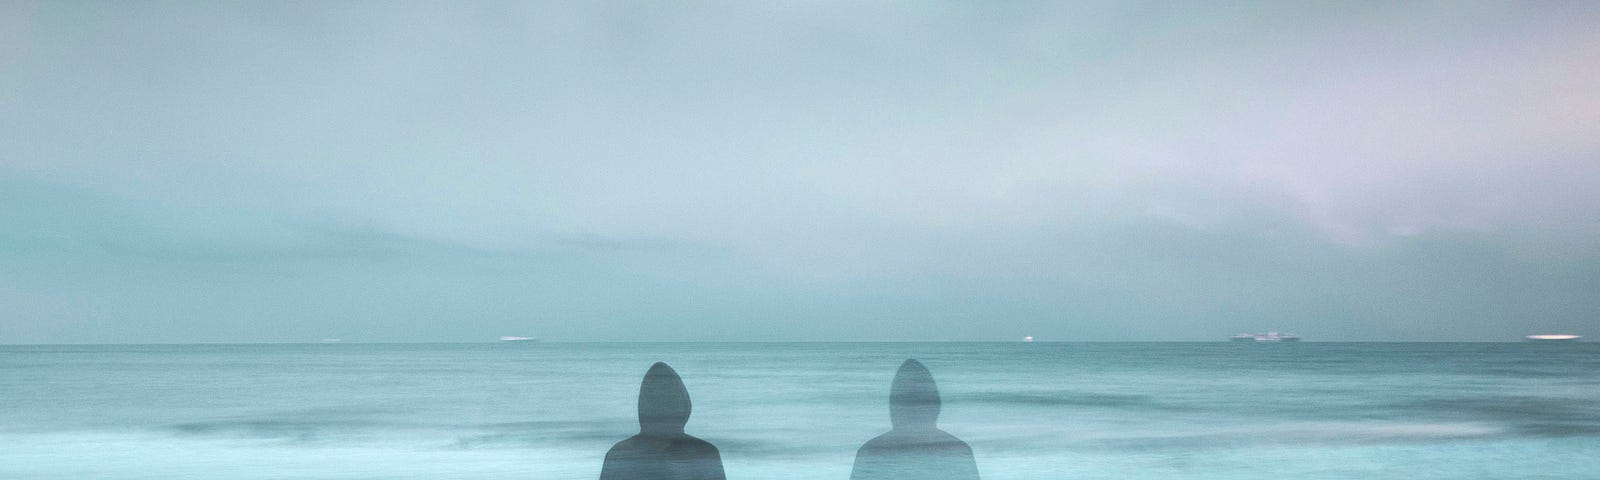 A bluish-grey picture, one person sitting on the left with a mirror shadow on the right, facing the ocean.